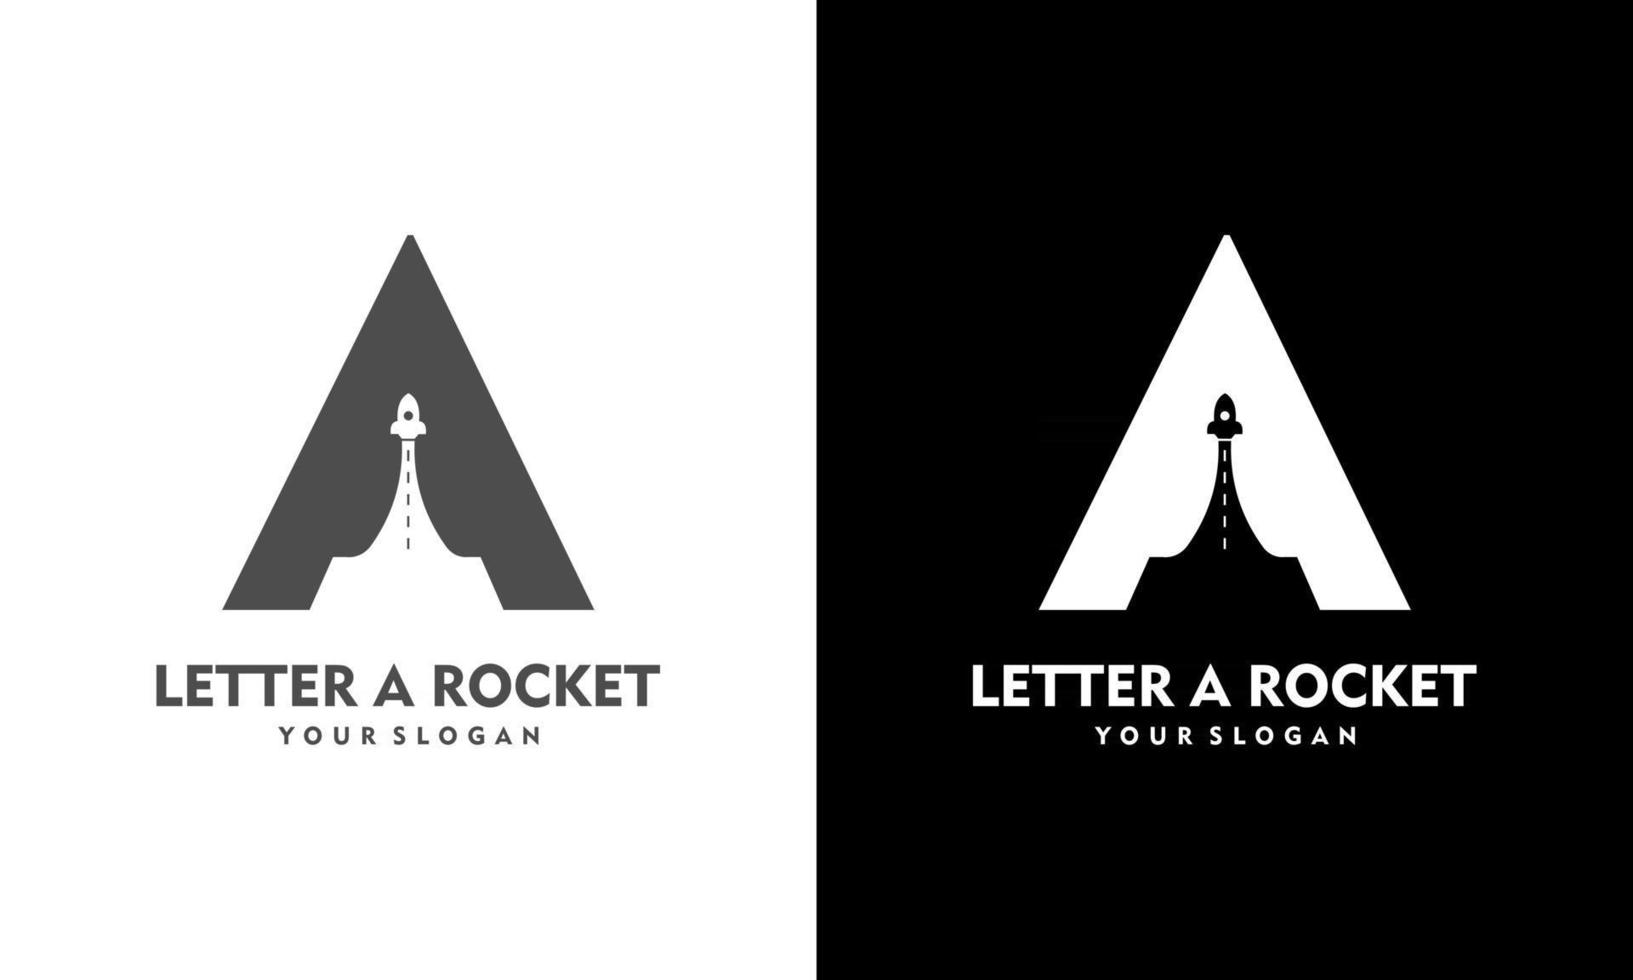 Ilustration vector graphic of Letter A template logo with rocket launch symbol. Negative space design trends.